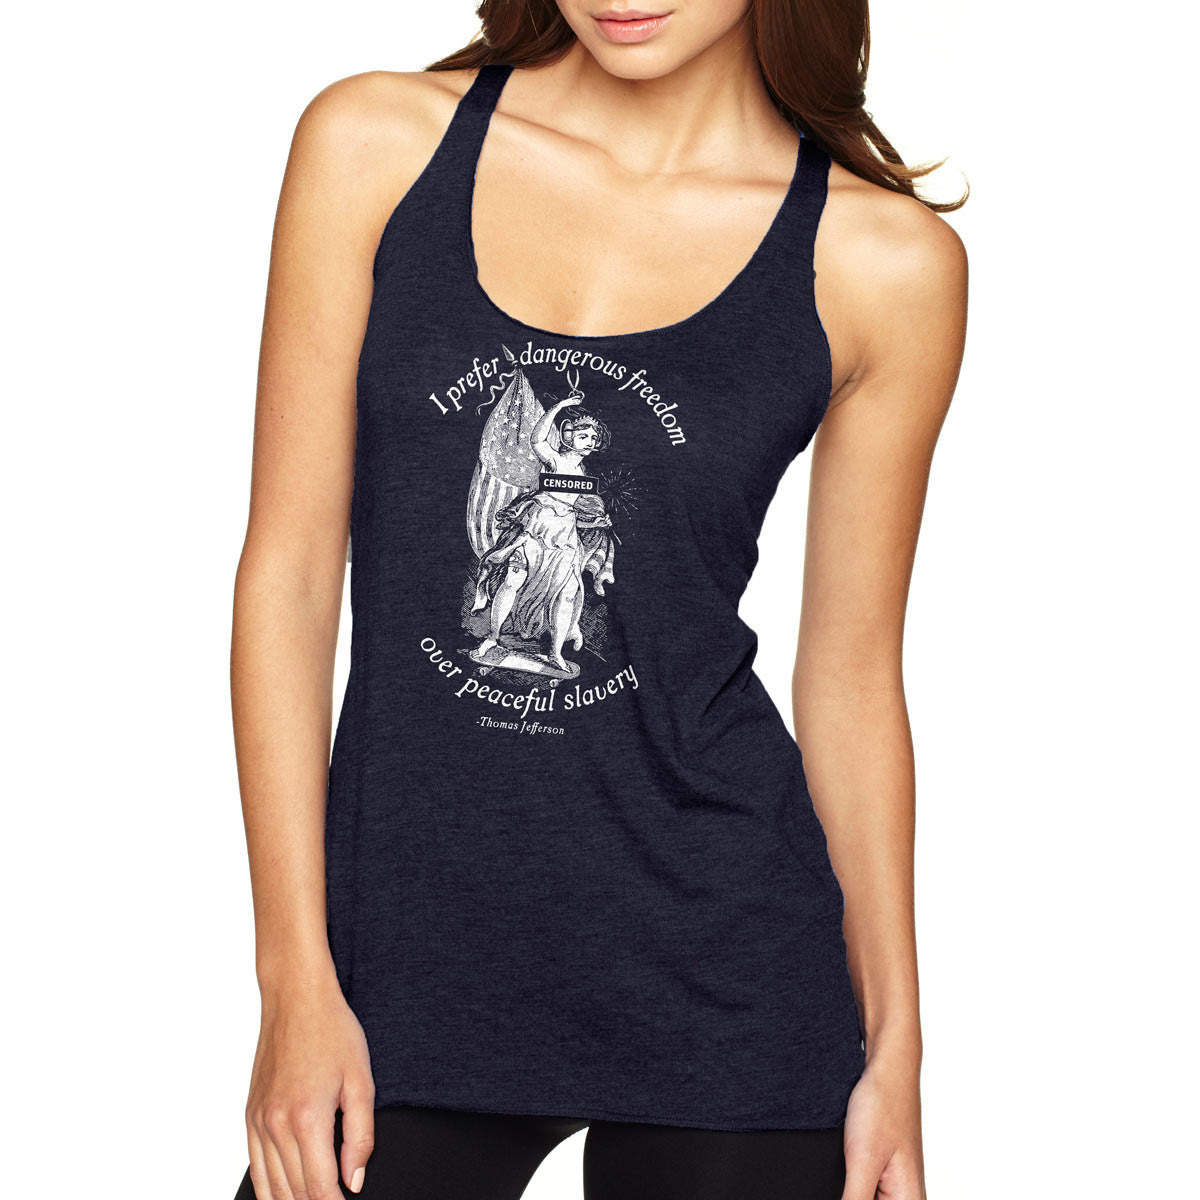 and Tank for Maniacs Ladies Workout | Tops Tops Women Liberty - Casual